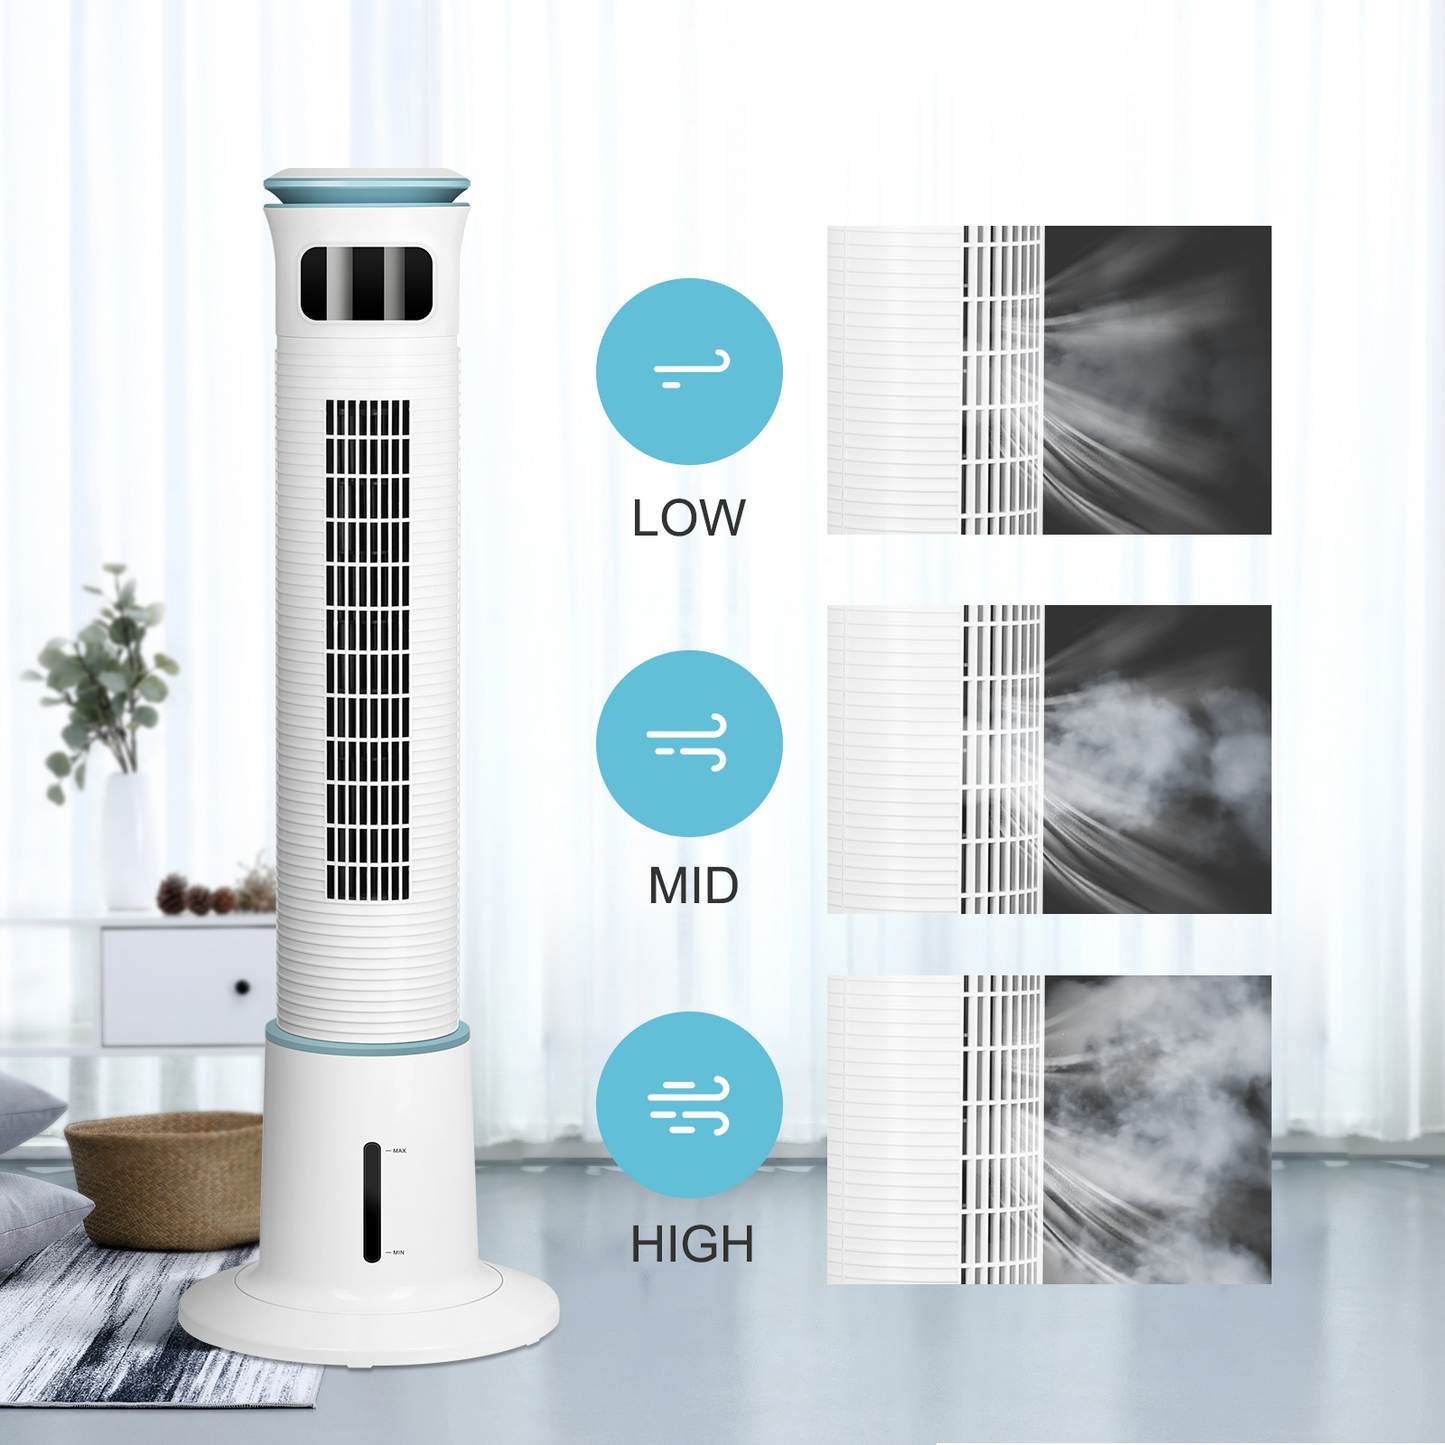 Mist Tower Fan, 12 Speeds & 3 Modes Settings Standing Fan, 15 Hour Timing Closure Cooling Fan, Low Noise, 43 Inches, White